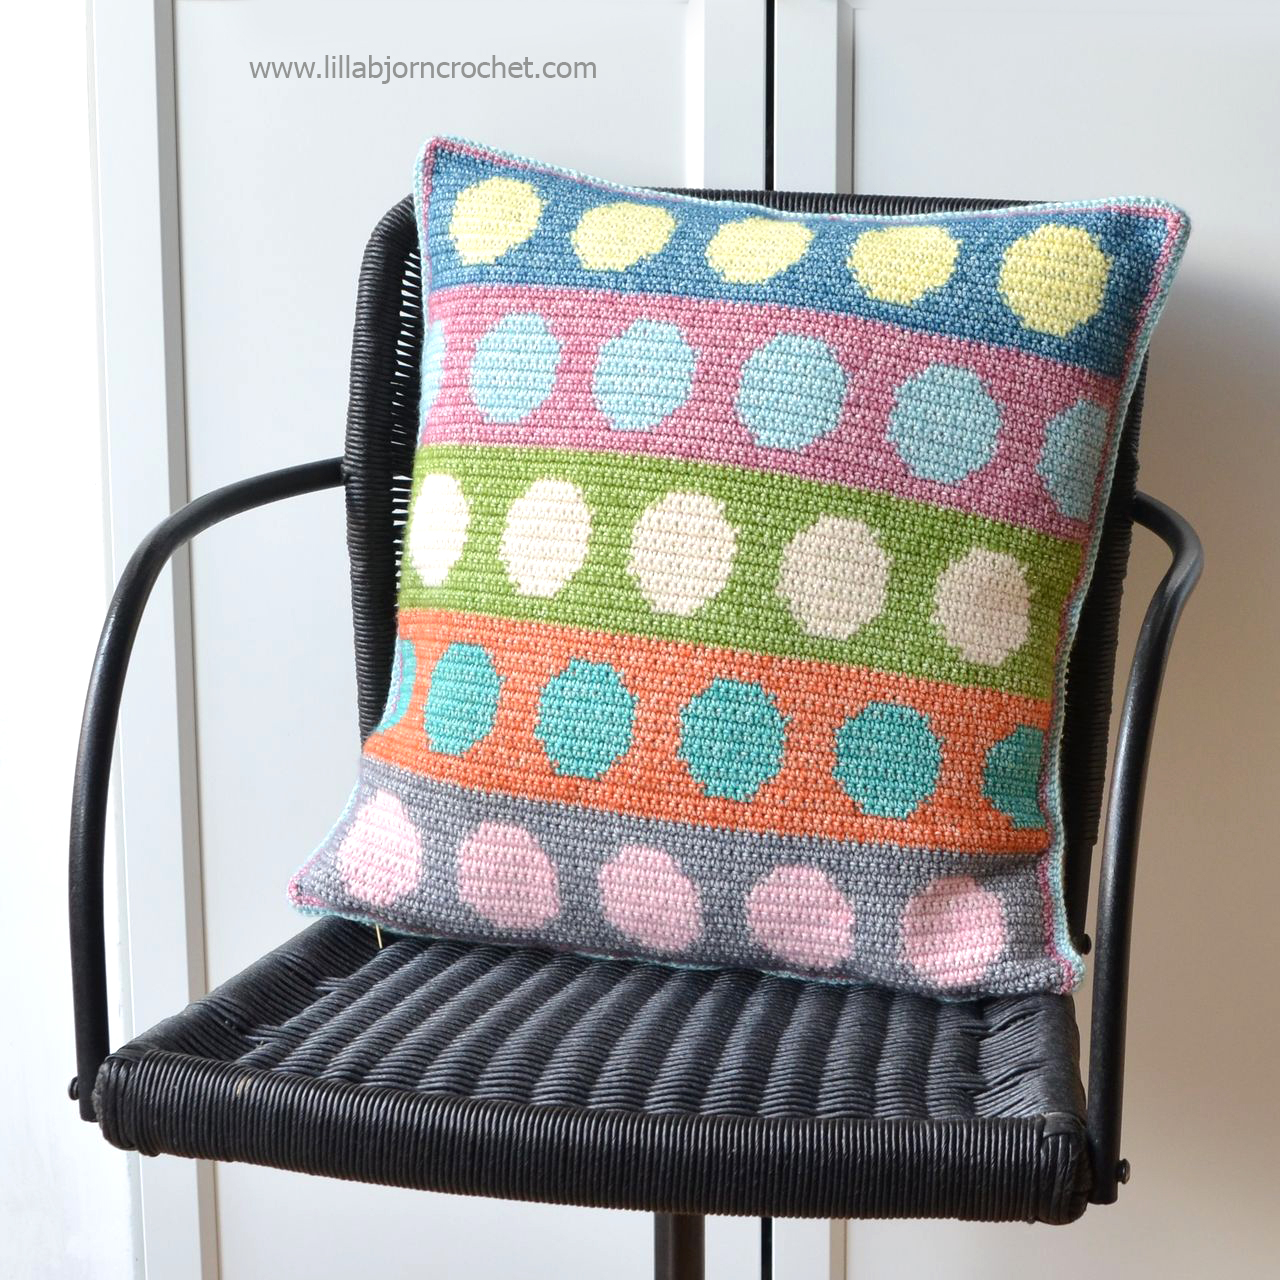 Free Crochet Pillow Patterns Tapestry Circles Pillow Free Crochet Pattern Lillabjrns Crochet